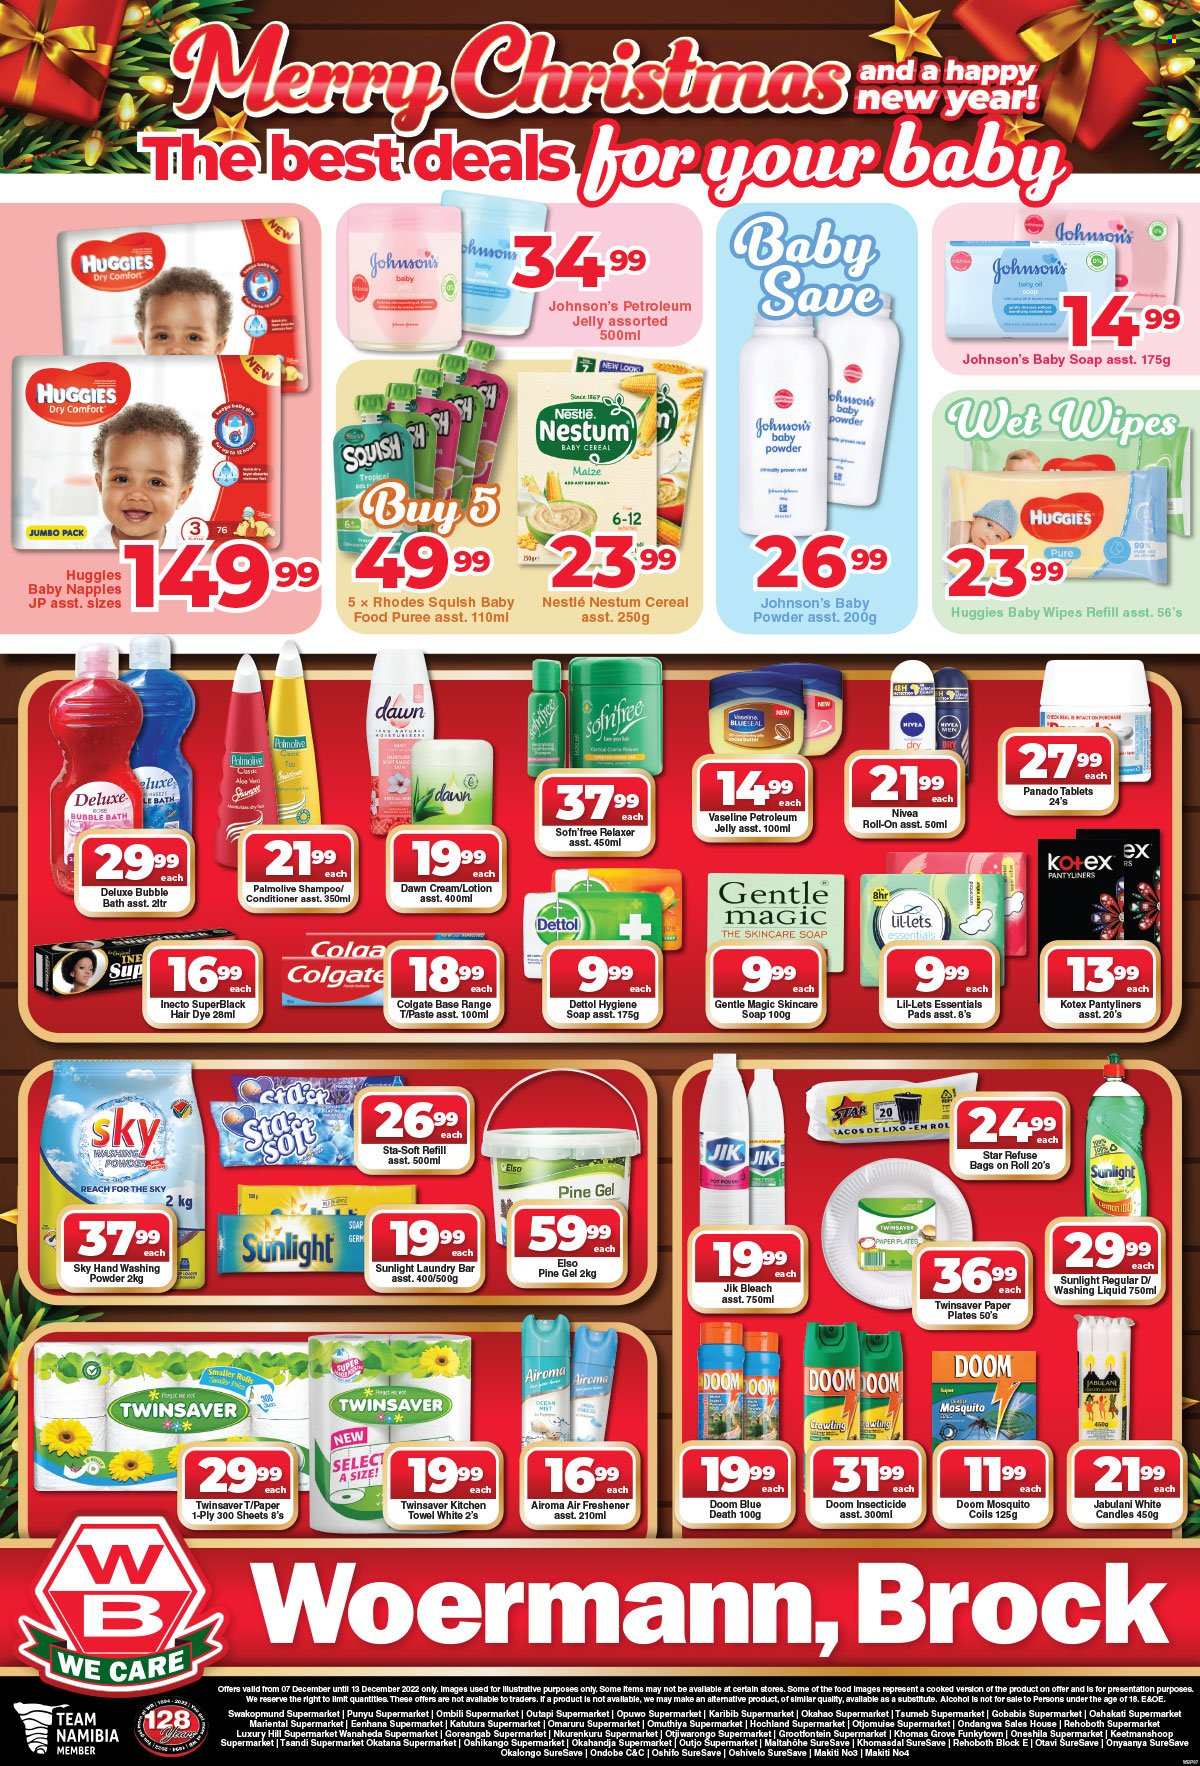 Woermann Brock catalogue  - 07/12/2022 - 13/12/2022 - Sales products - Nestlé, cereals, alcohol, wipes, Huggies, baby wipes, Johnson's, kitchen towels, Dettol, bleach, laundry powder, laundry soap bar, Sunlight, bubble bath, shampoo, Nivea, Palmolive, Vaseline, soap, Colgate, Kotex, pantyliners, Lil-lets, petroleum jelly, Gentle Magic, conditioner, relaxer, body lotion, roll-on. Page 6.